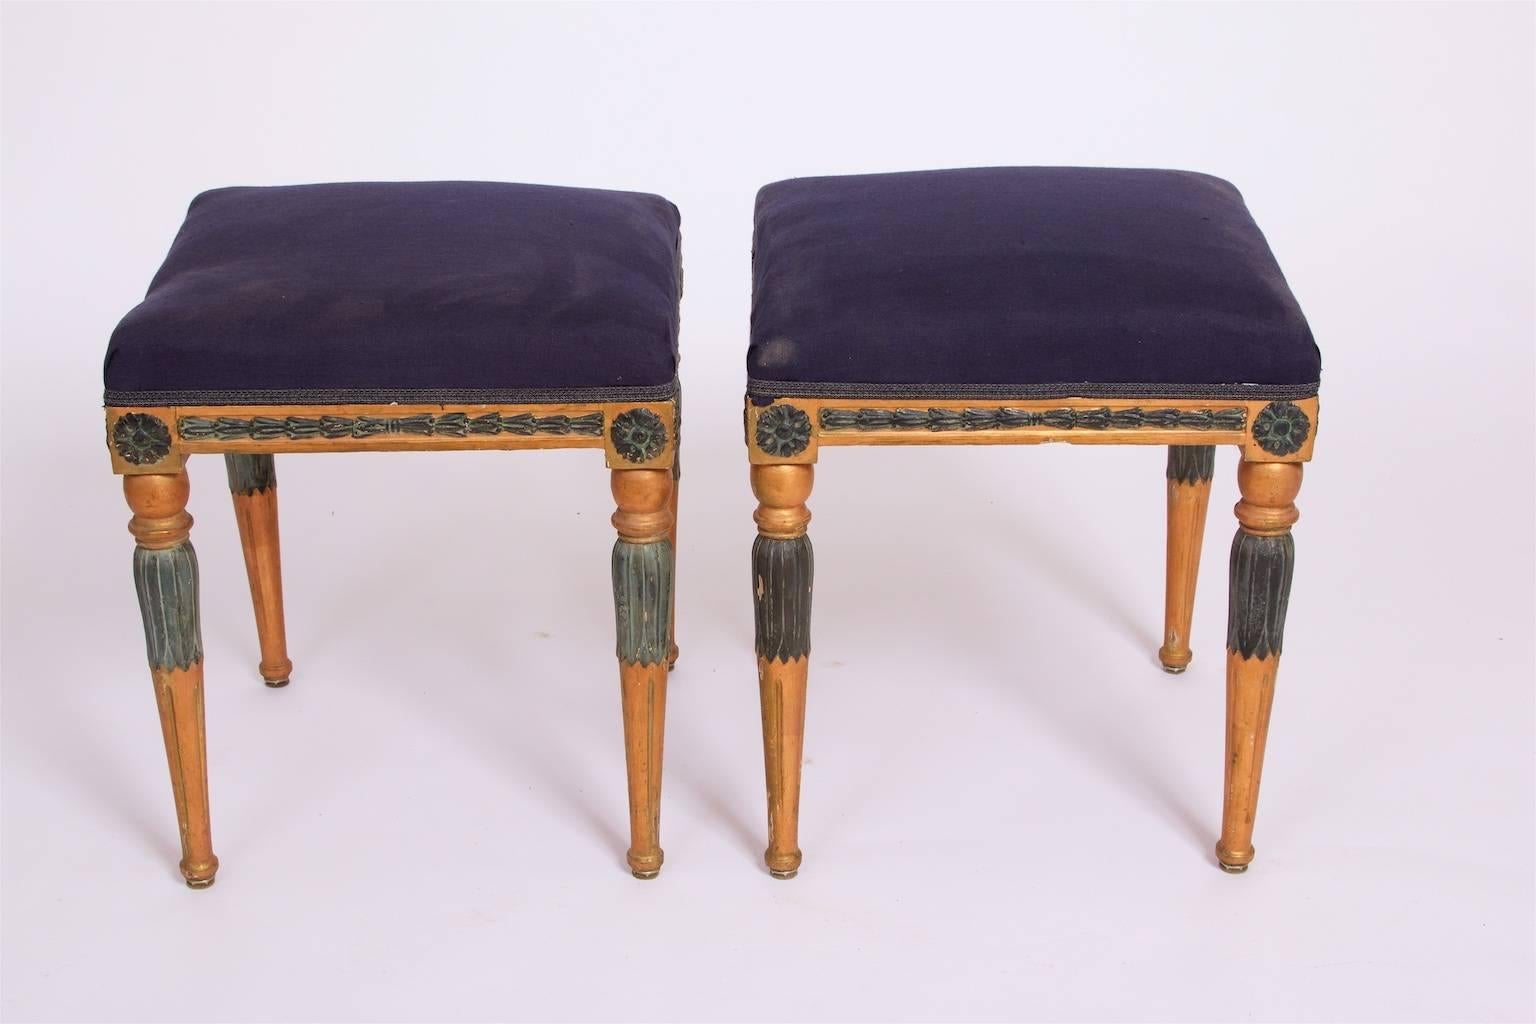 A pair of late Gustavian stools. Gilt and painted wood, circa 1800, Stockholm. Sweden
Velvet seating/upholstery. Very beautiful and elegant in its combination of fabric and gilt wood and color.
Meausures are 45 centimeters in height. 40x40